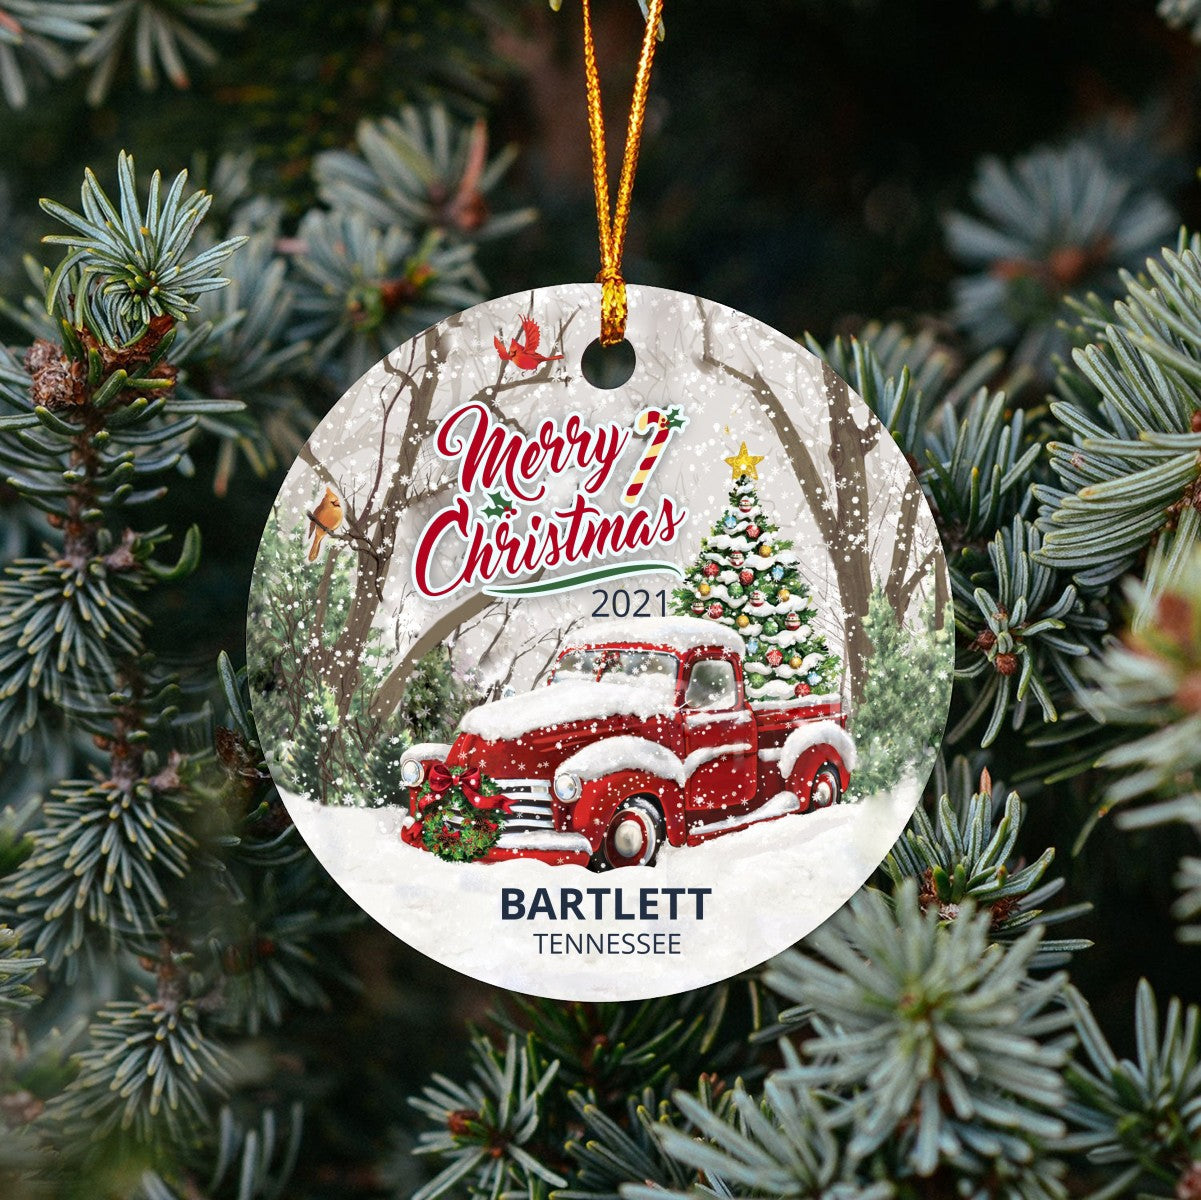 Christmas Tree Ornaments Bartlett - Ornament Customize With Name City And State Bartlett Tennessee TN - Red Truck Xmas Ornaments 3'' Plastic Gift For Family, Friend And Housewarming